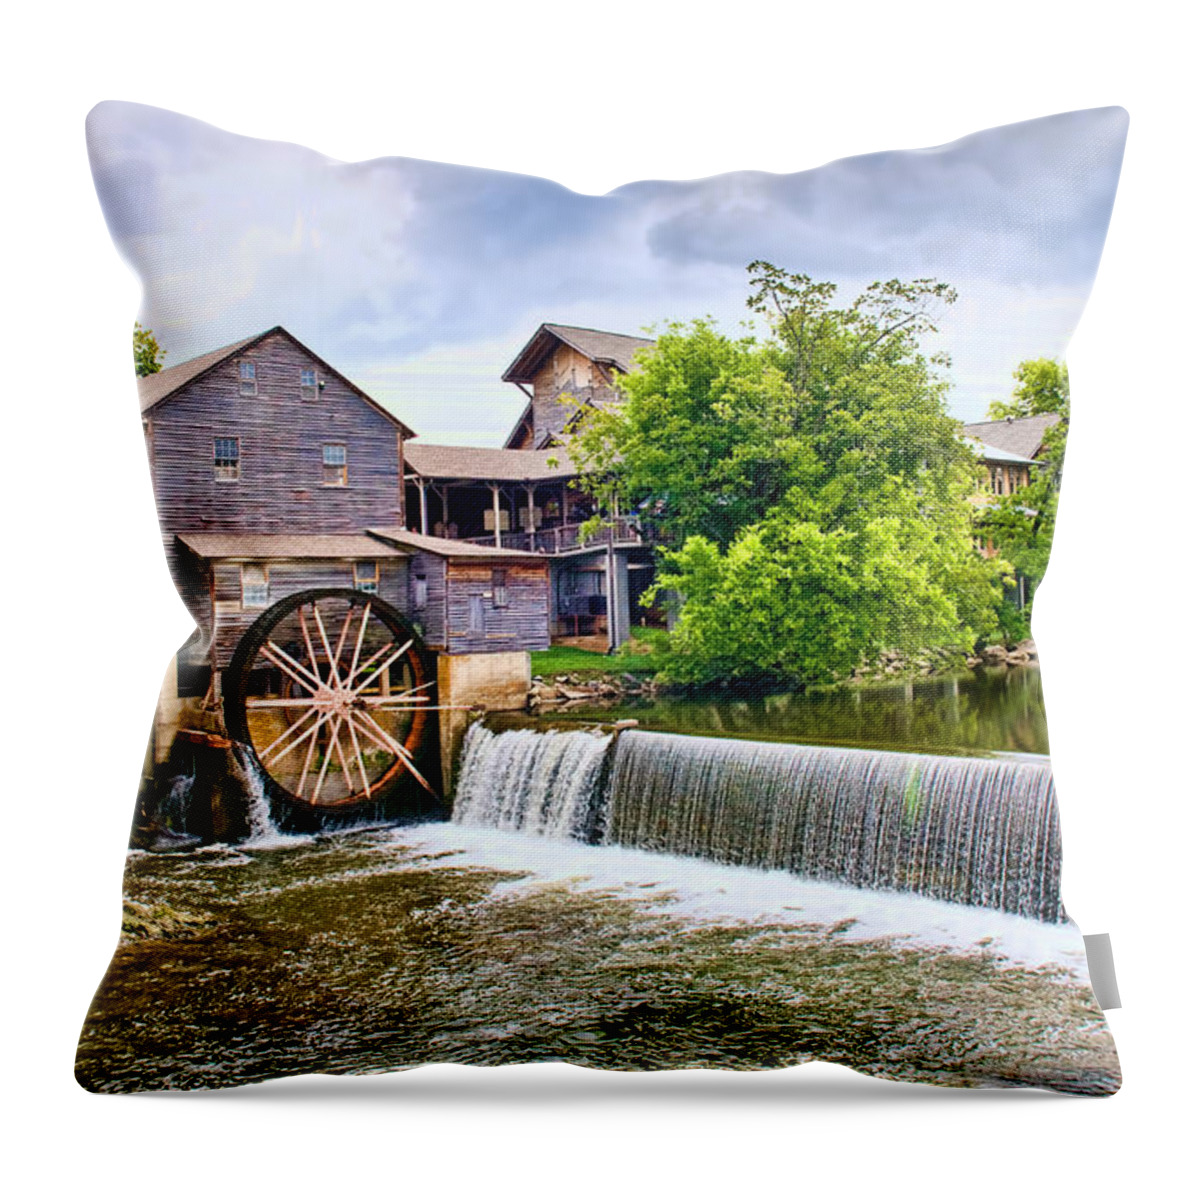 Old Mill Throw Pillow featuring the photograph Old Pigeon Forge Mill by Scott Hansen